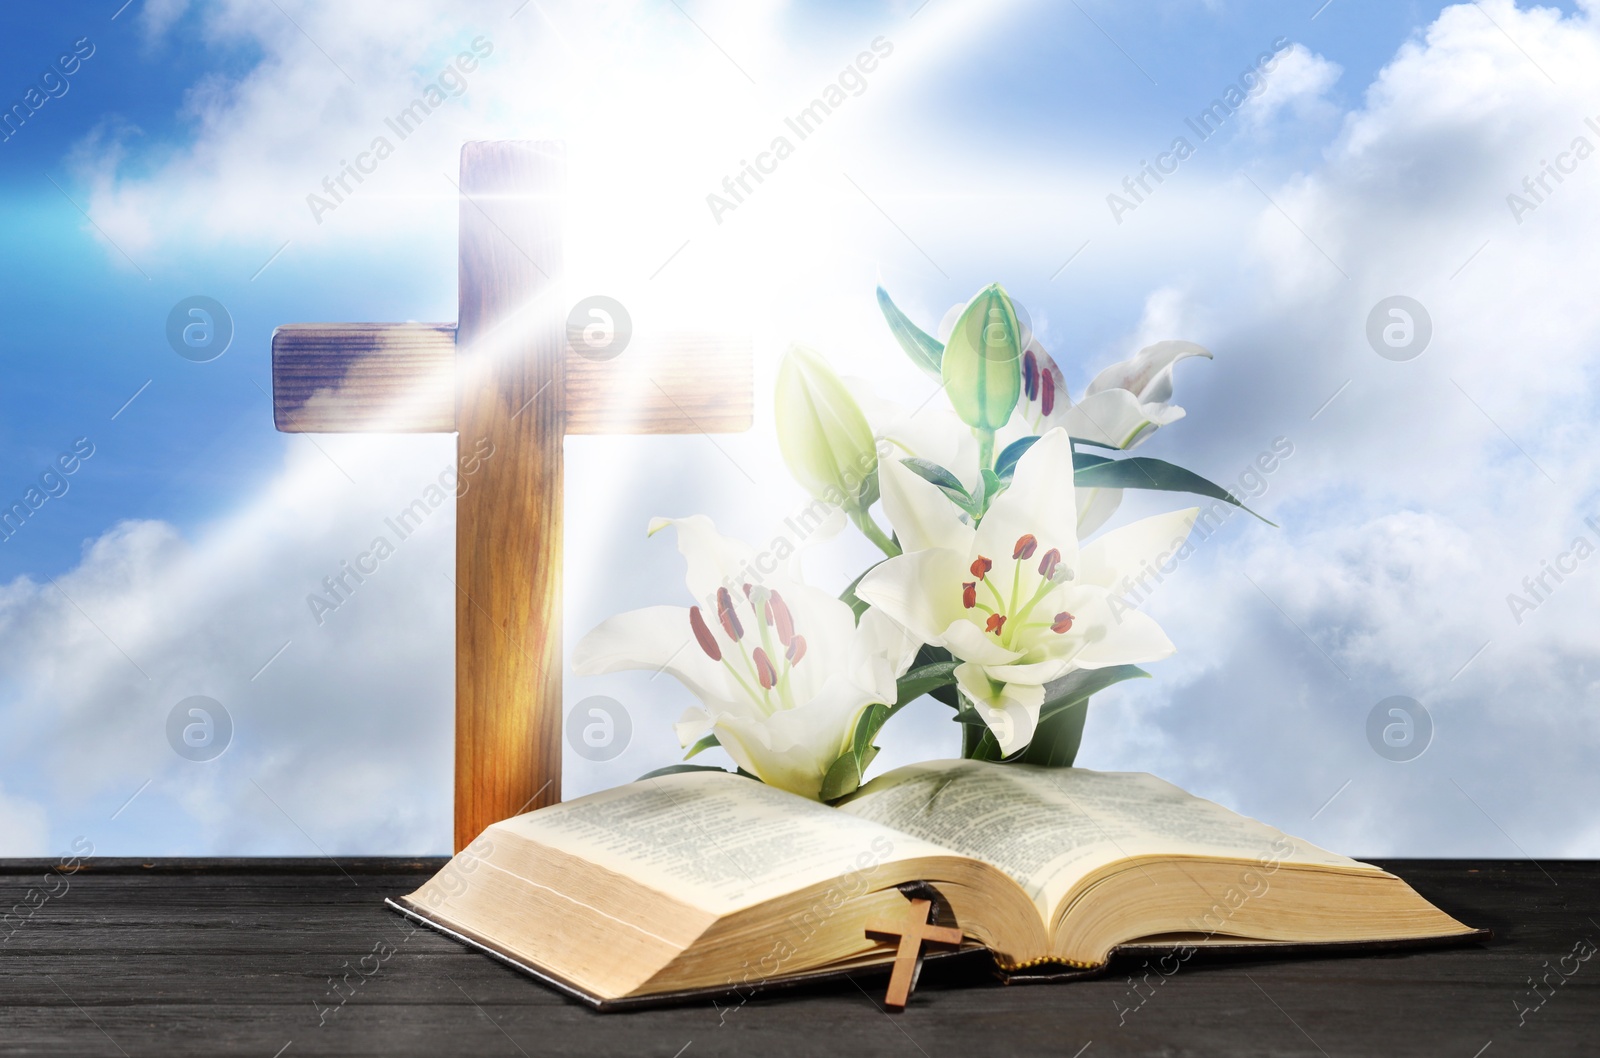 Image of Holy Bible, cross and lily flowers on wooden table against blue sky. Religion of Christianity